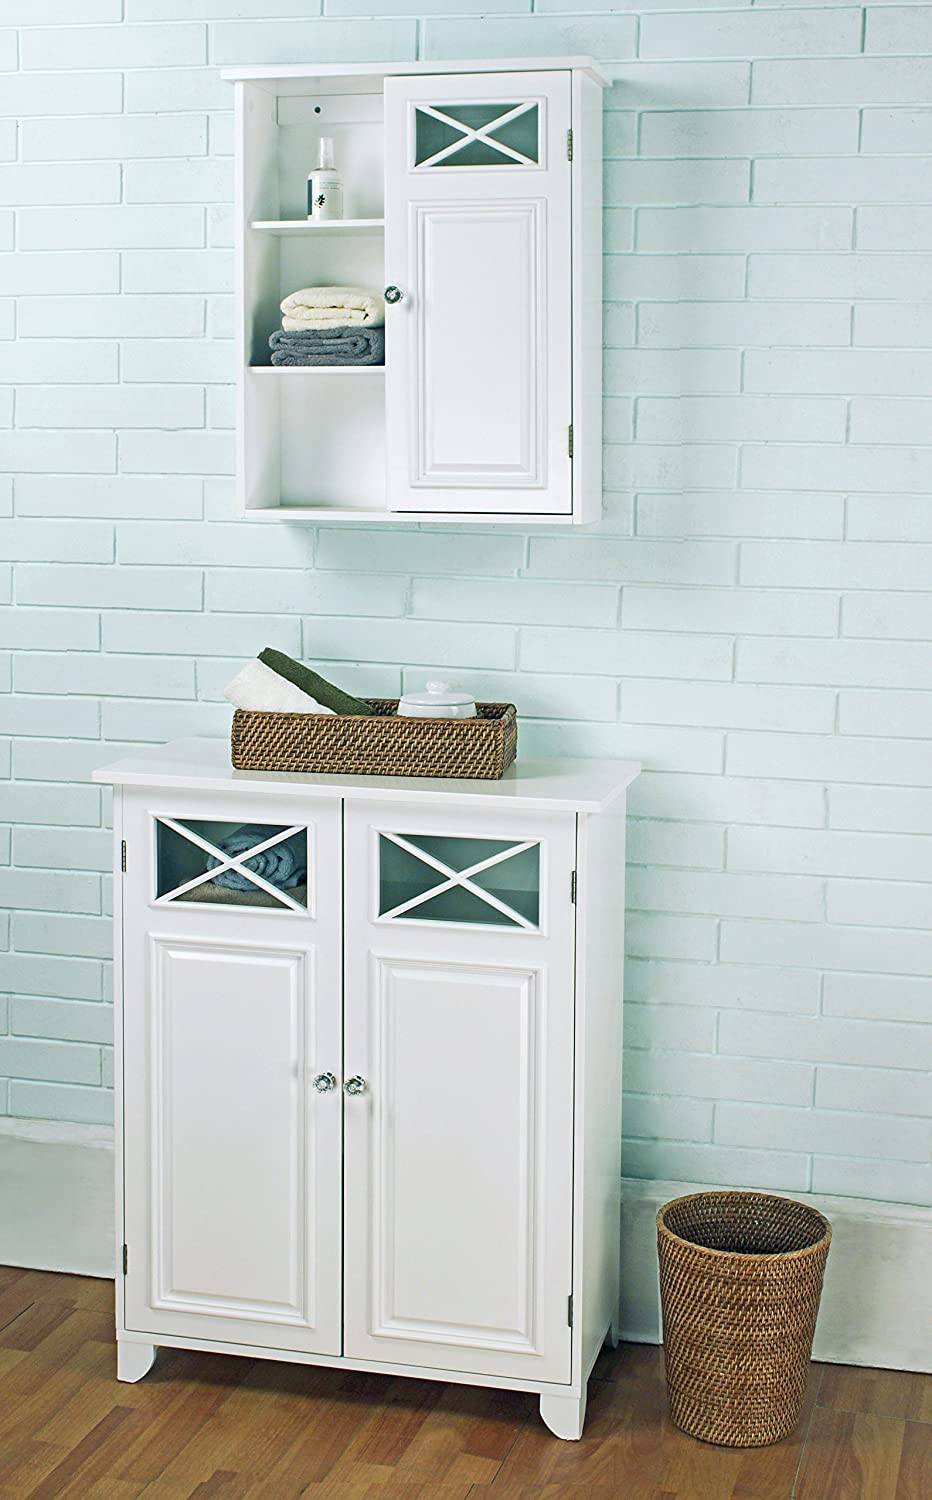 Small Bathroom Cabinets
 8 Best Bathroom Storage Cabinets For Small Spaces in 2019